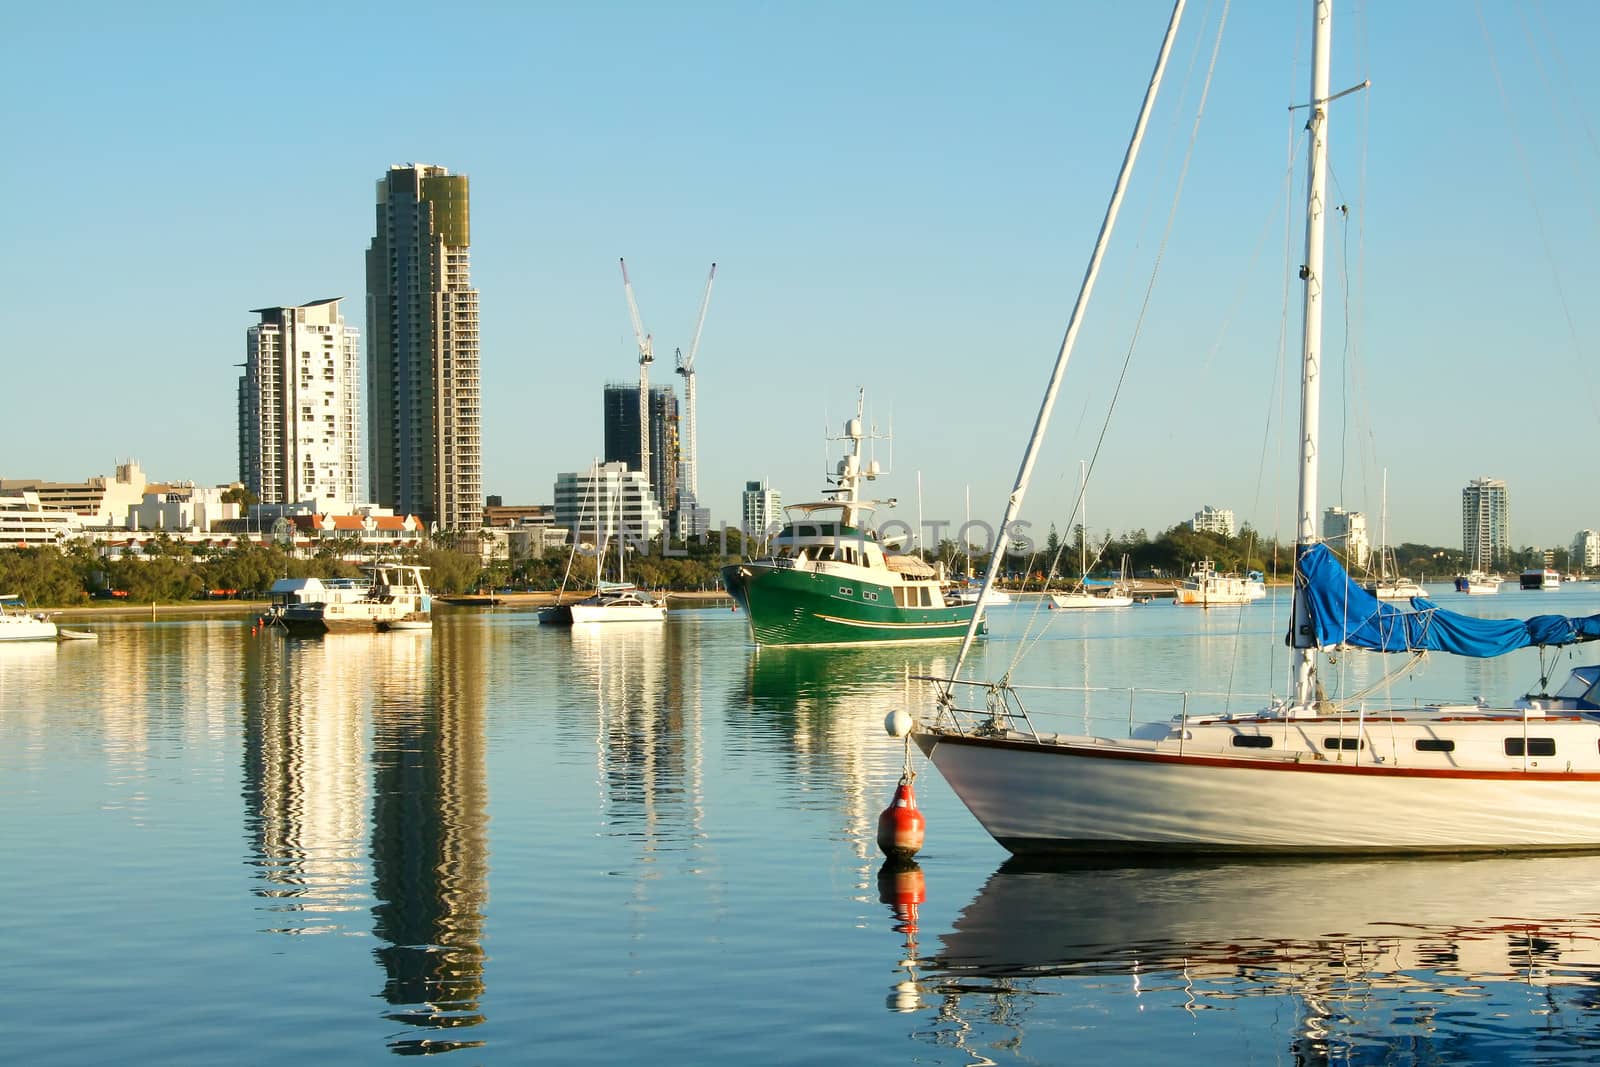 View of the boats on the Broadwater Gold Coast Australia looking toward Southport.